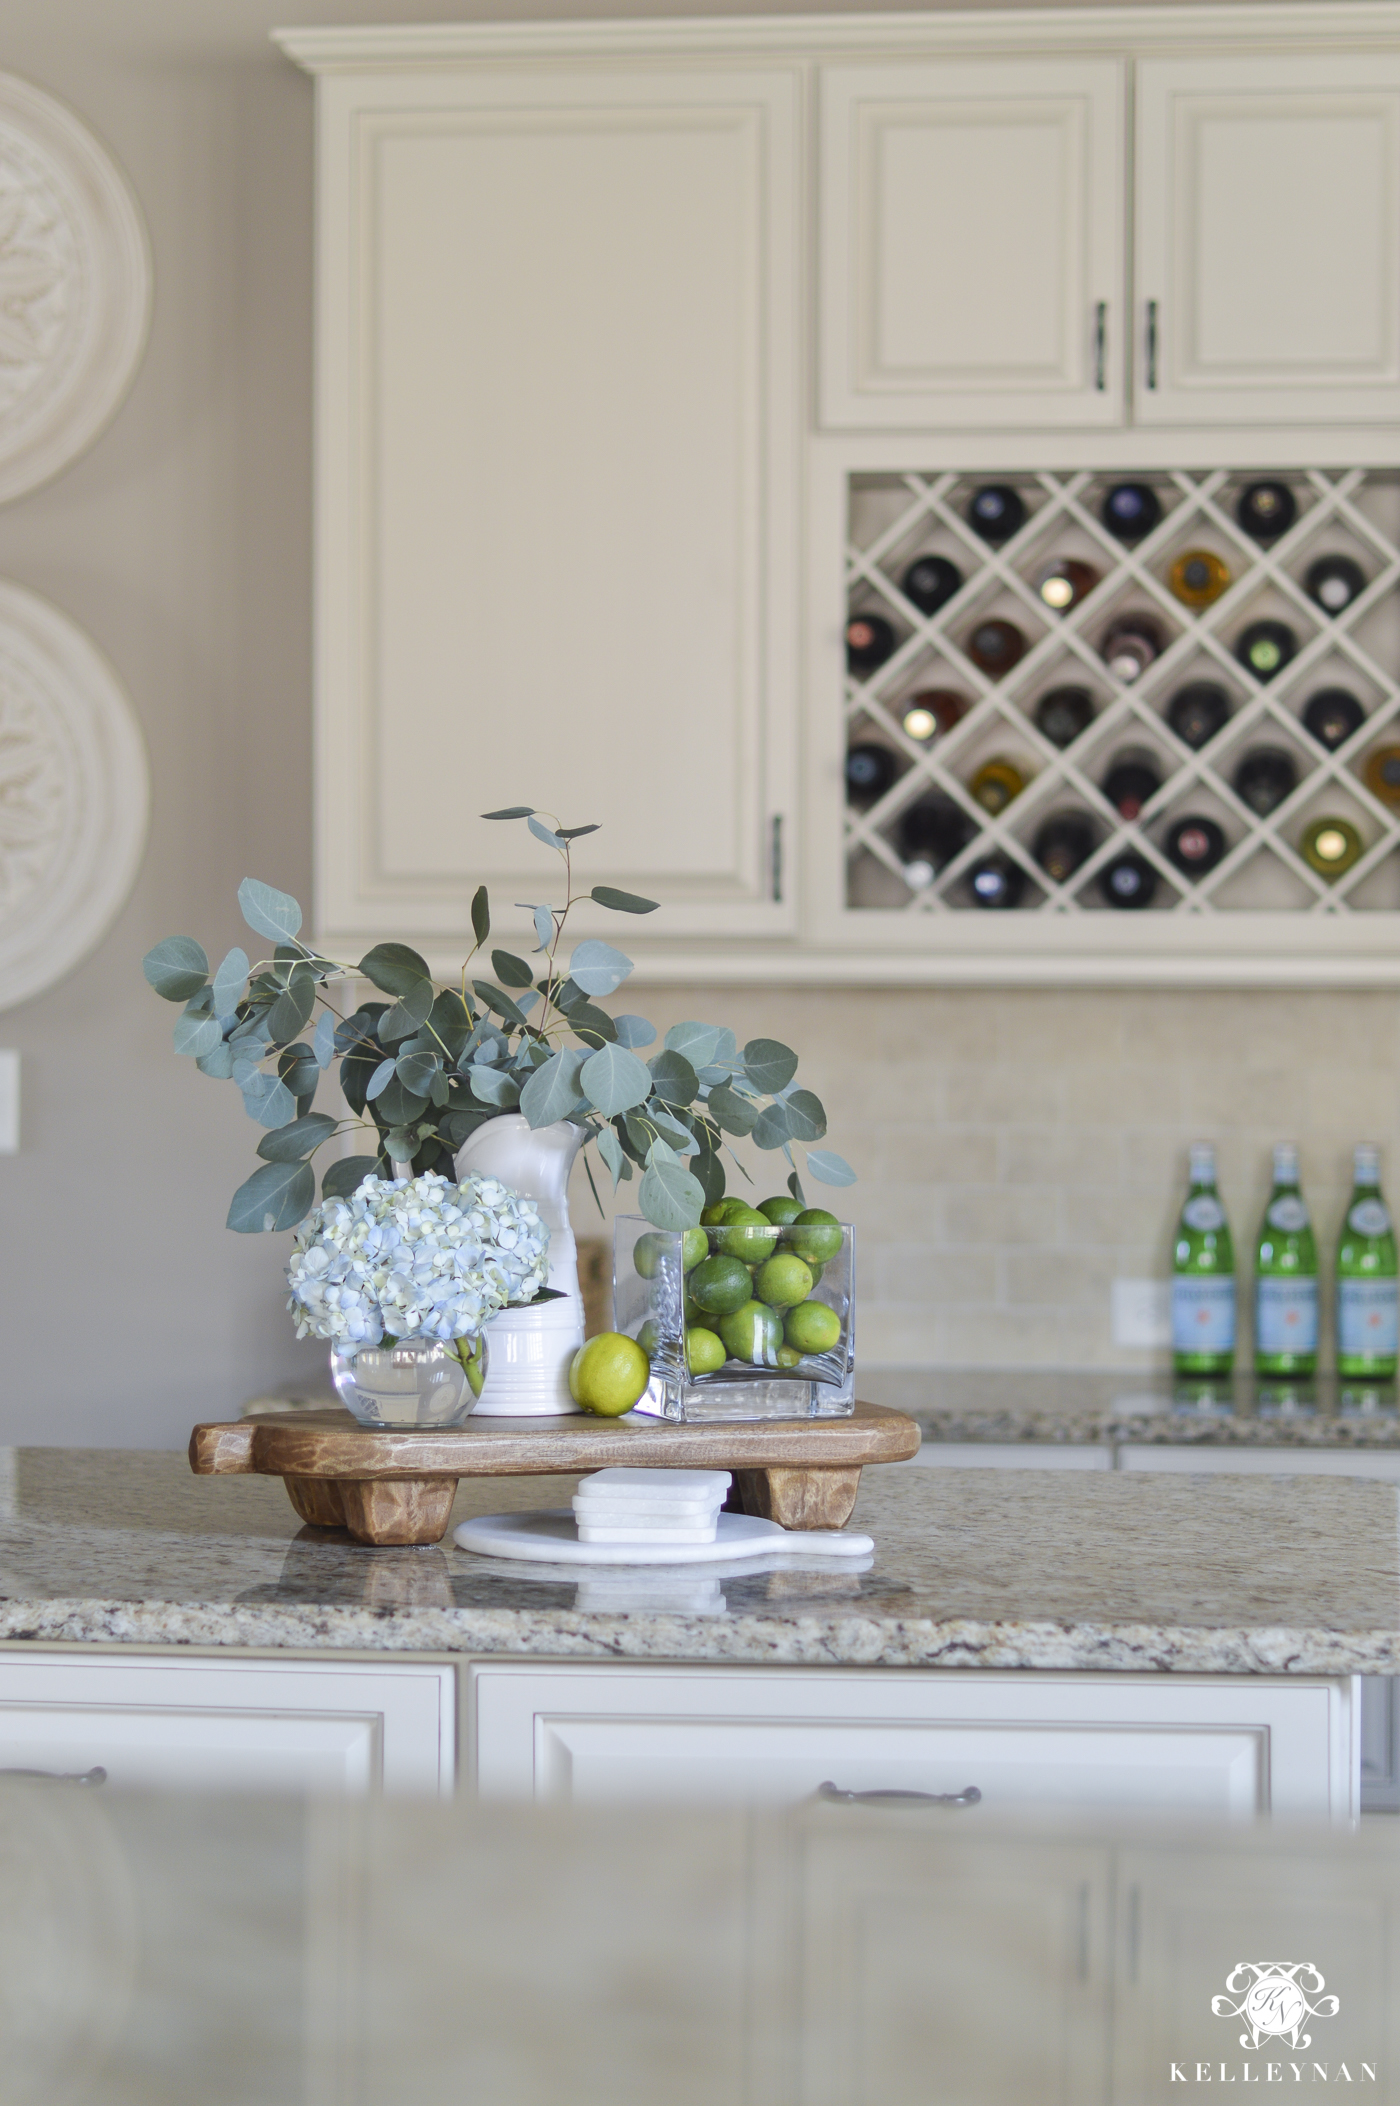 The Prettiest Kitchen Accessories and Counter Top Decor - Kelley Nan